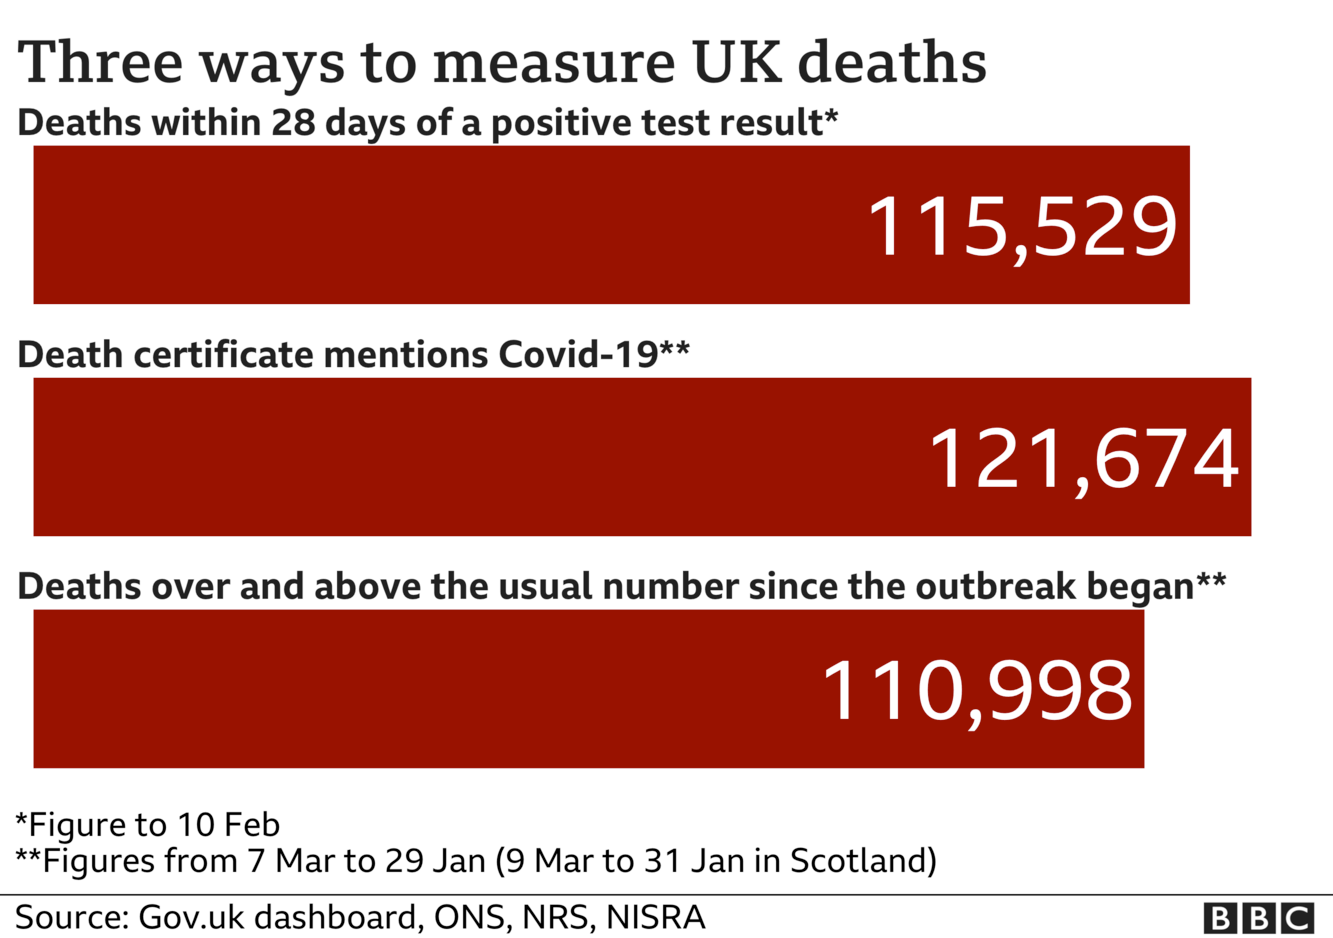 Chart showing three different totals for coronavirus deaths - the government measures all deaths within 28 days of a positive test, that total is 115,529. The ONS includes all deaths where coronavirus was mentioned on the death certificate, that total is 121,679 to the 29 January and the final total includes all deaths over and above the average for the time of year and that total is now 110,998